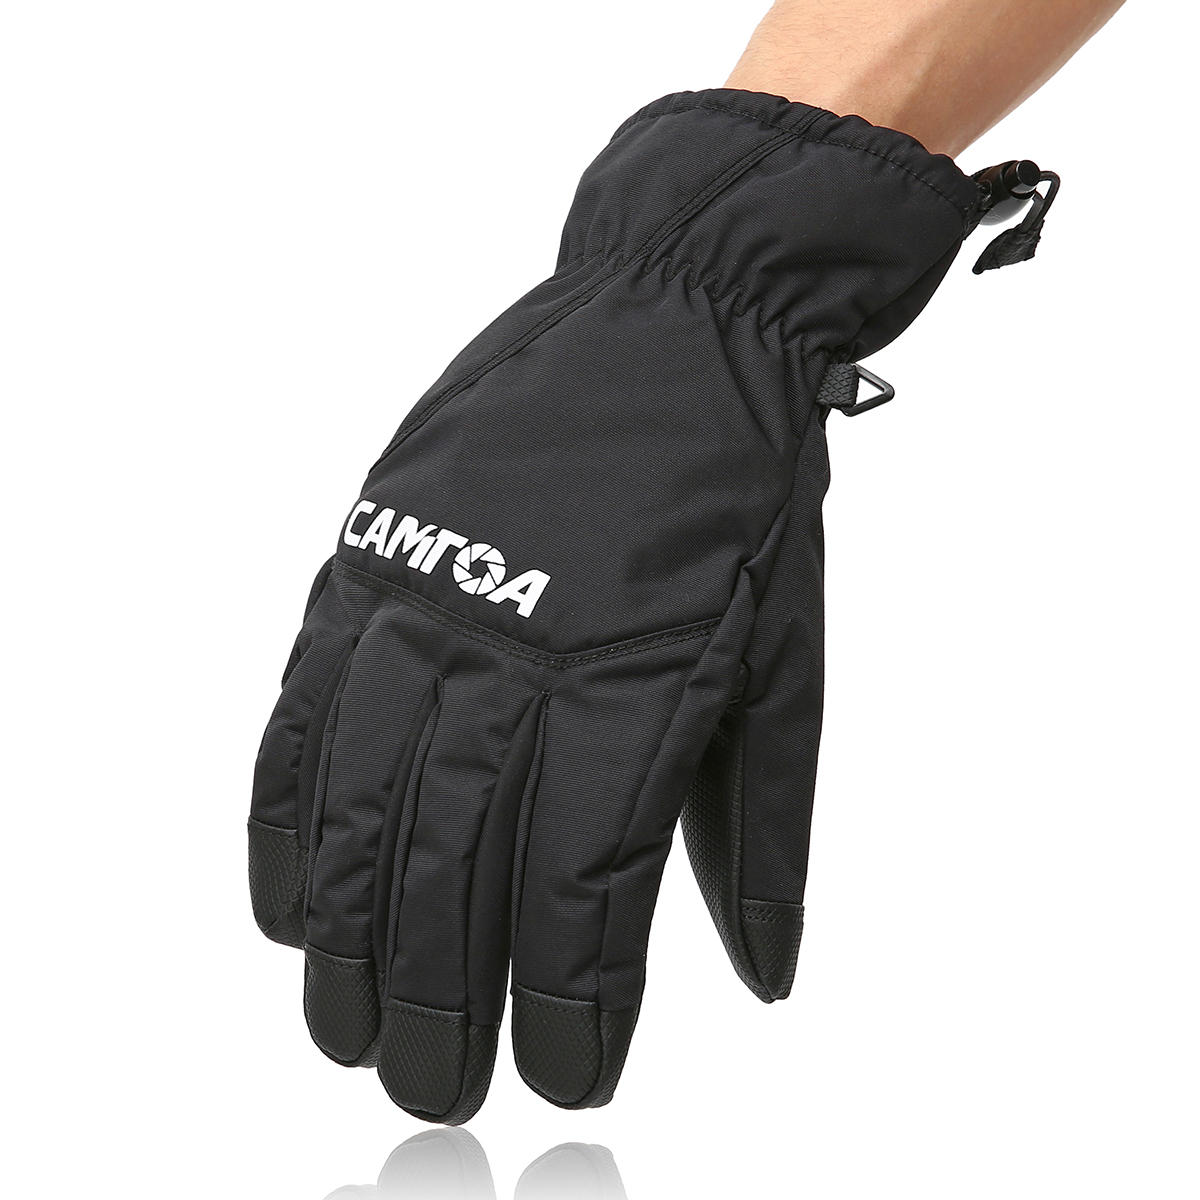 CAMTOA Winter Ski Gloves 3M Thinsulate Warm Waterproof Breathable Snow Gloves for Men and Women